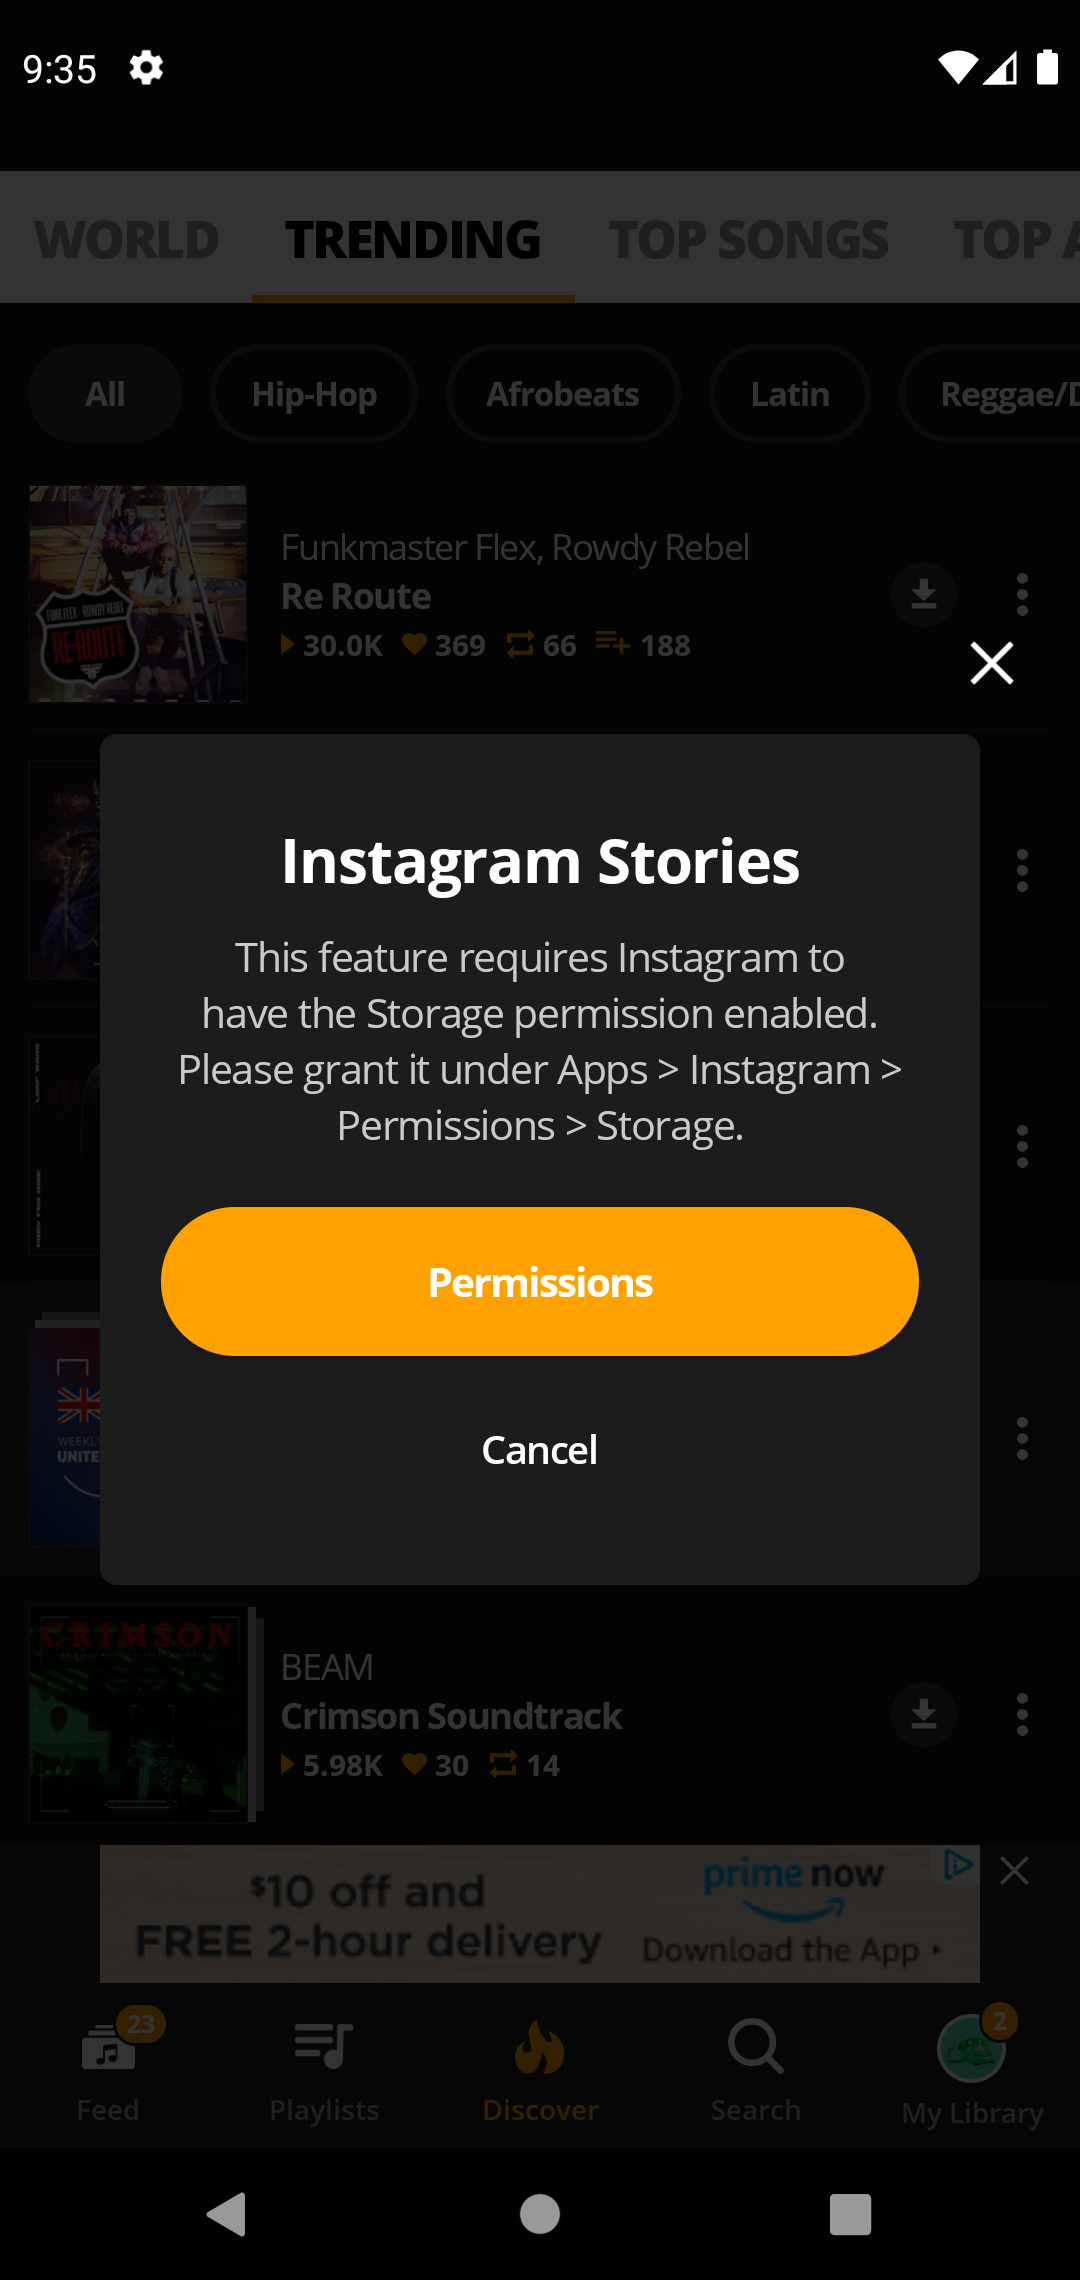 Why can't I share to Instagram? – Audiomack Help Center